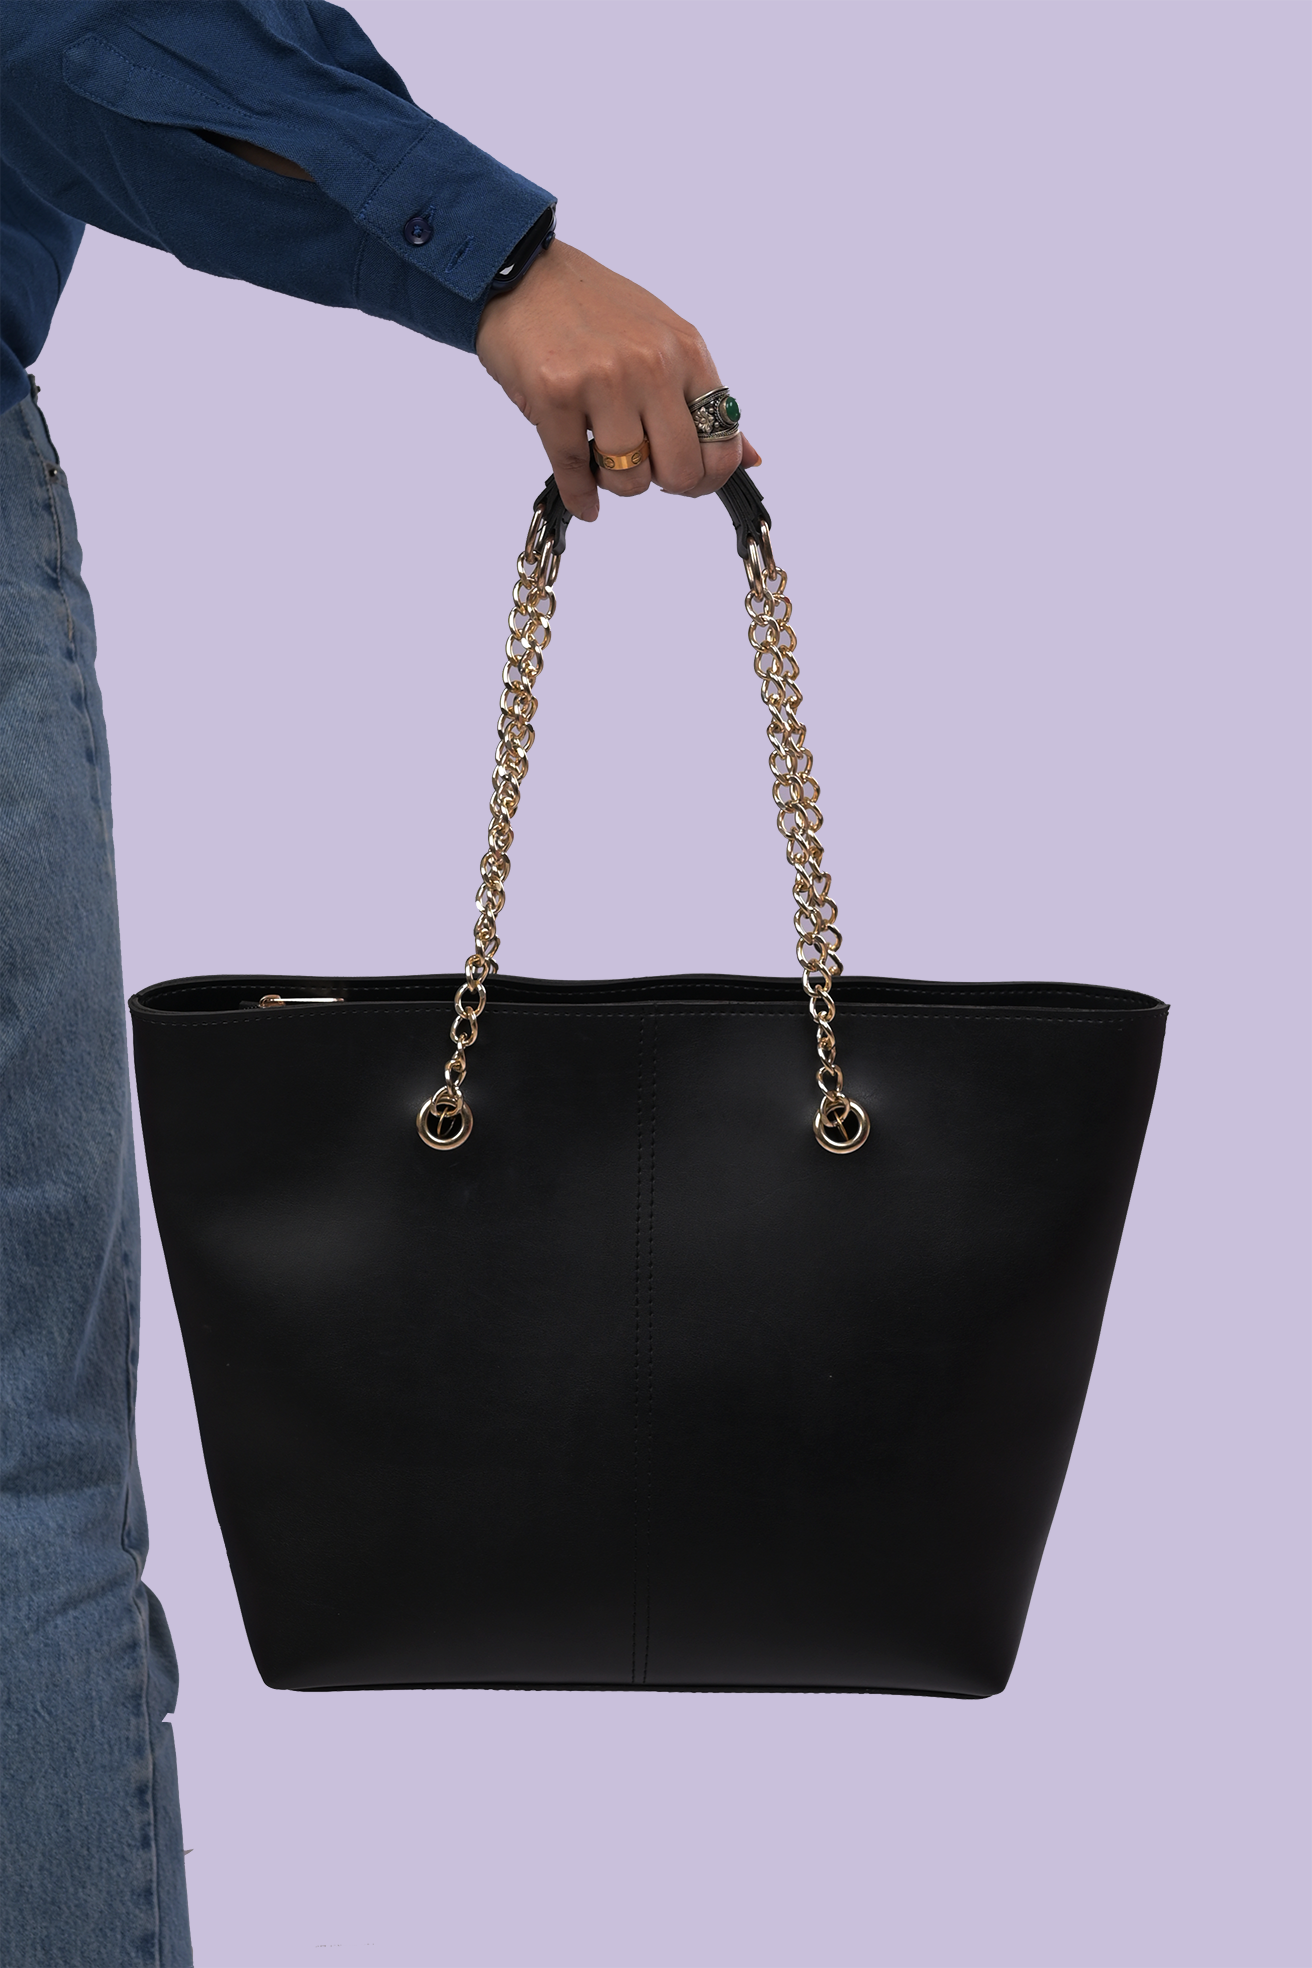 Bag with long chain handle-black Classy and chic, this large double chain  handle bag is made for stylish women with busy lifestyles. …